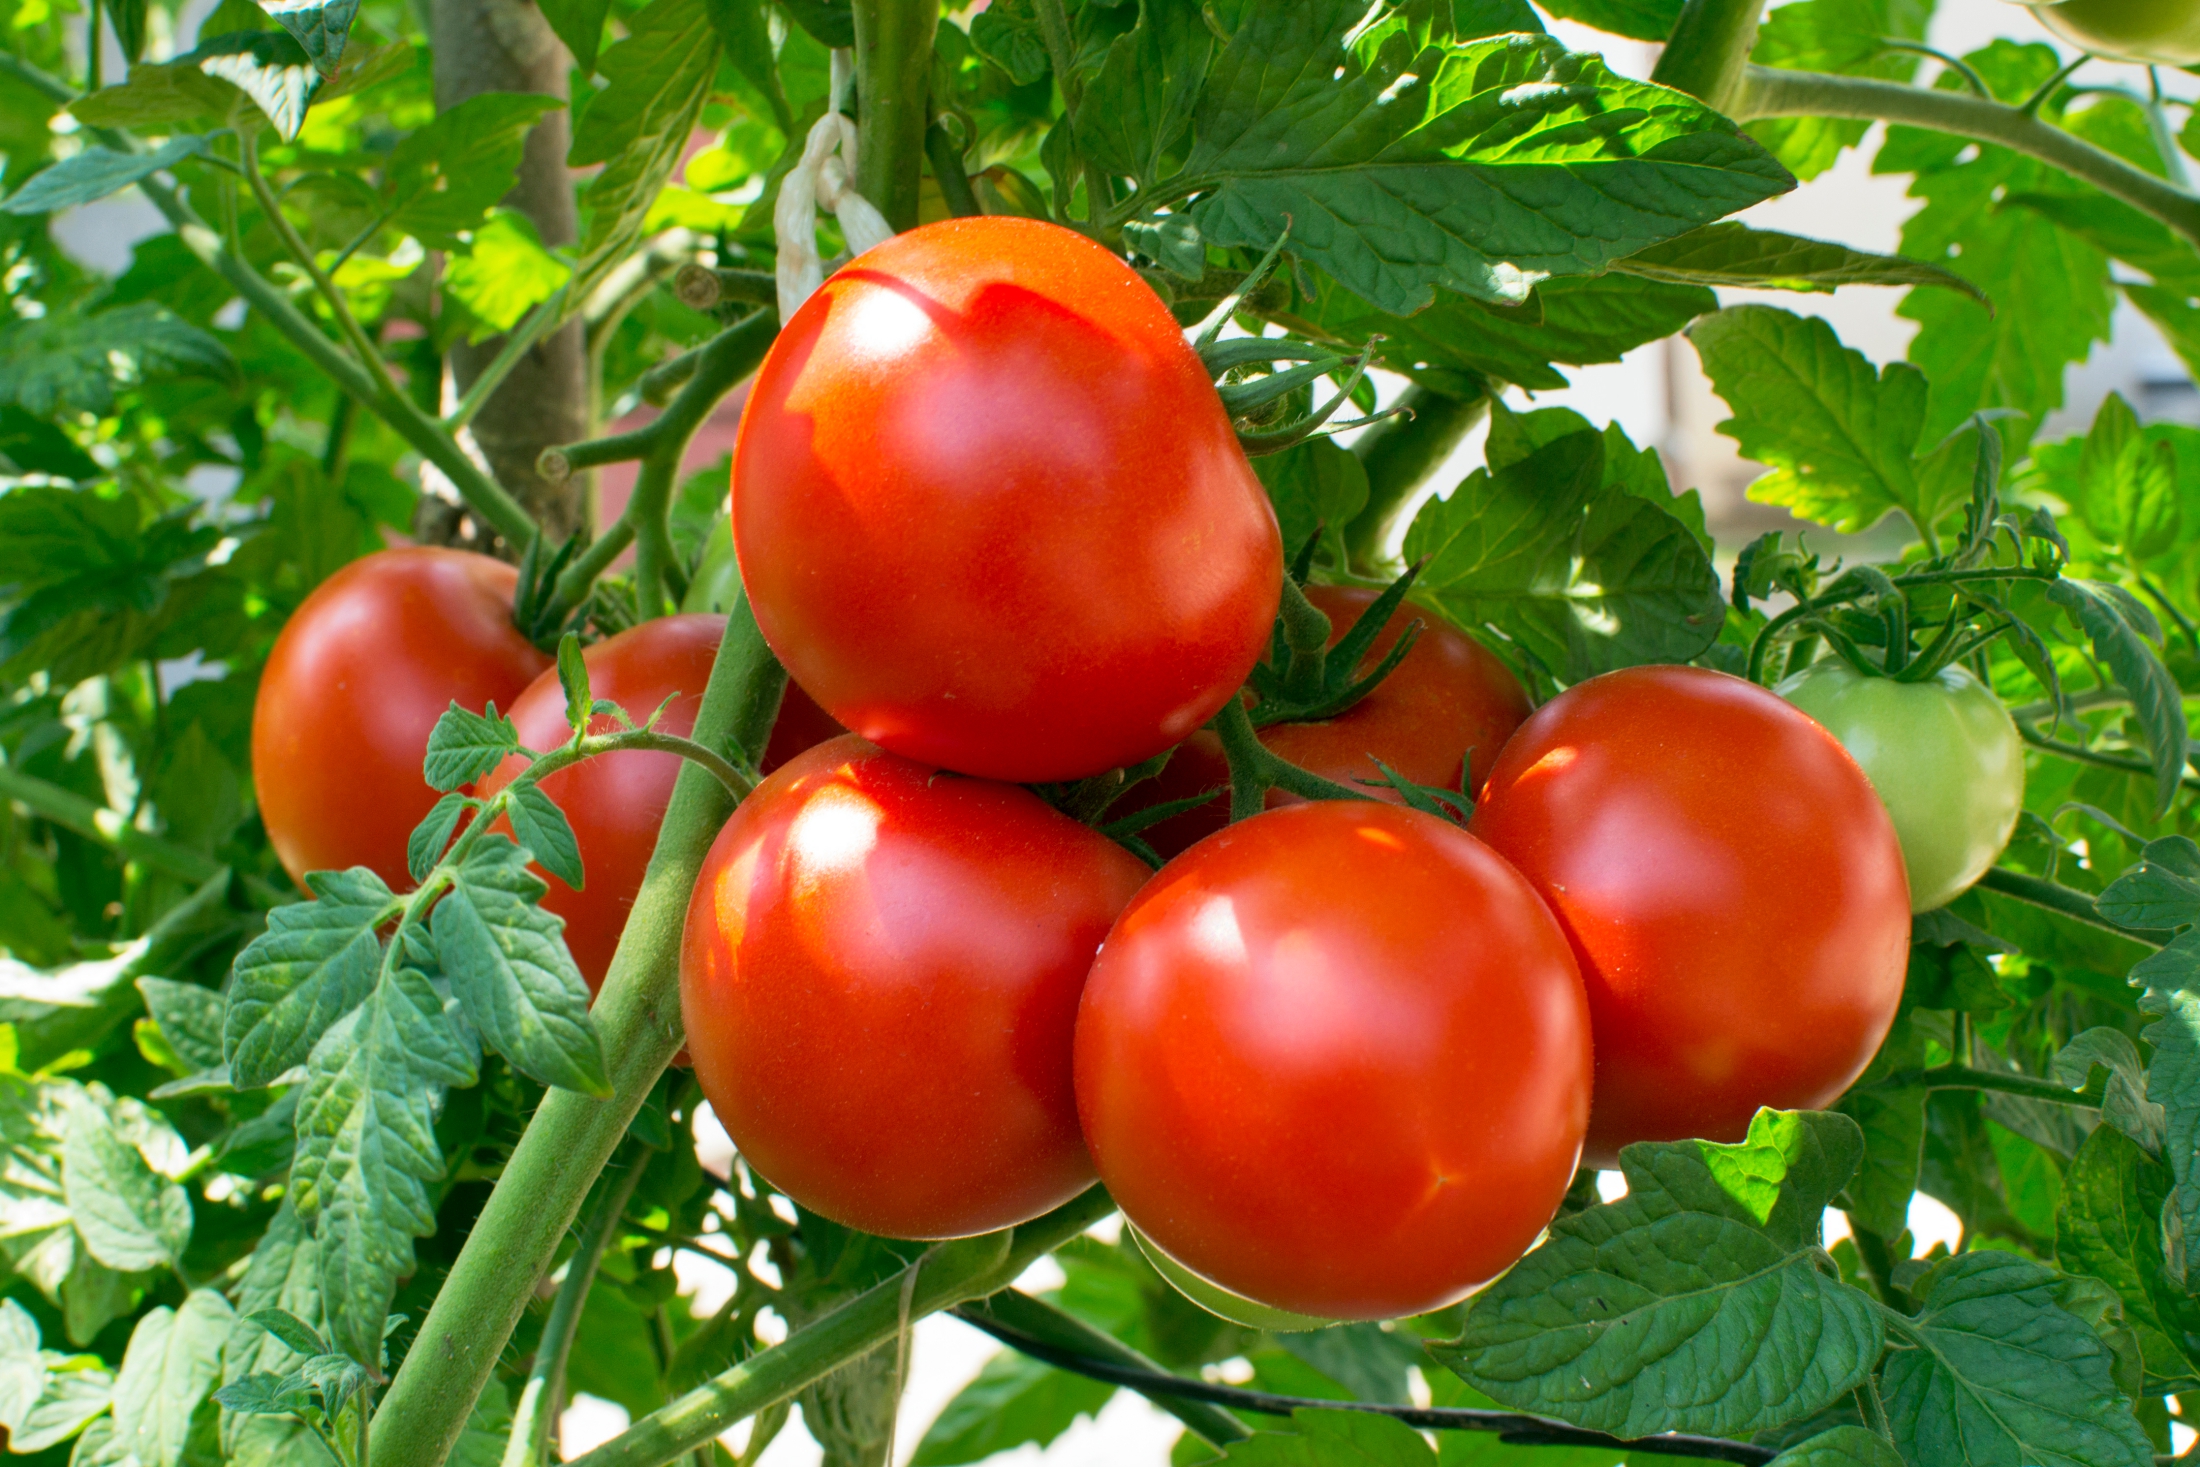 Growing Tomatoes: From Planting to Harvest | The Old Farmer's Almanac